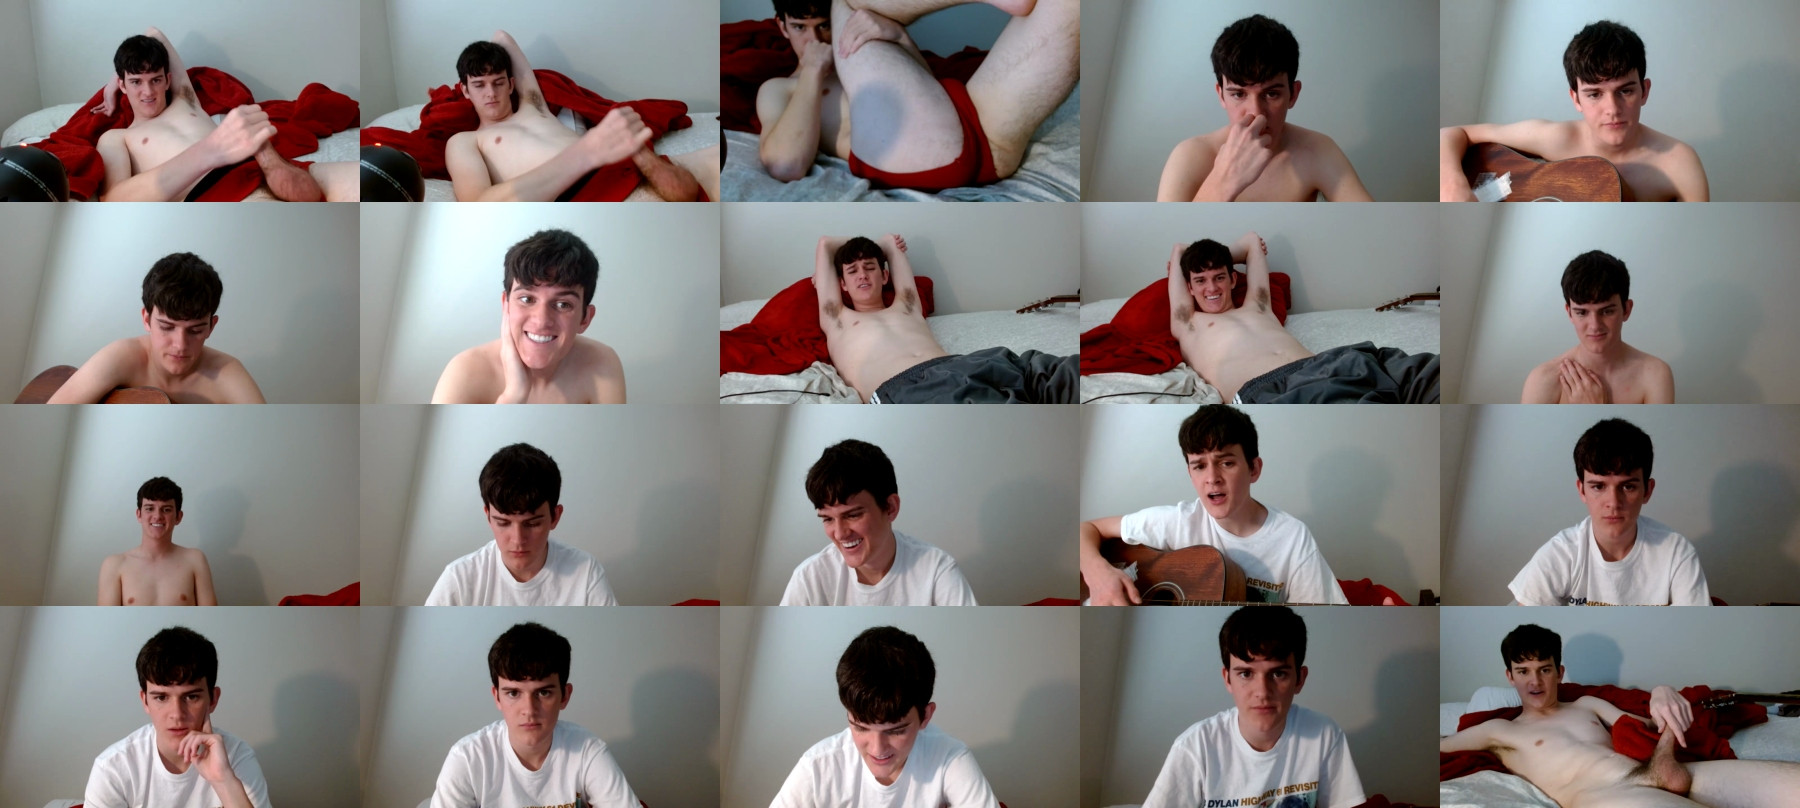 Therecklessrealist  24-04-2021 Male Video